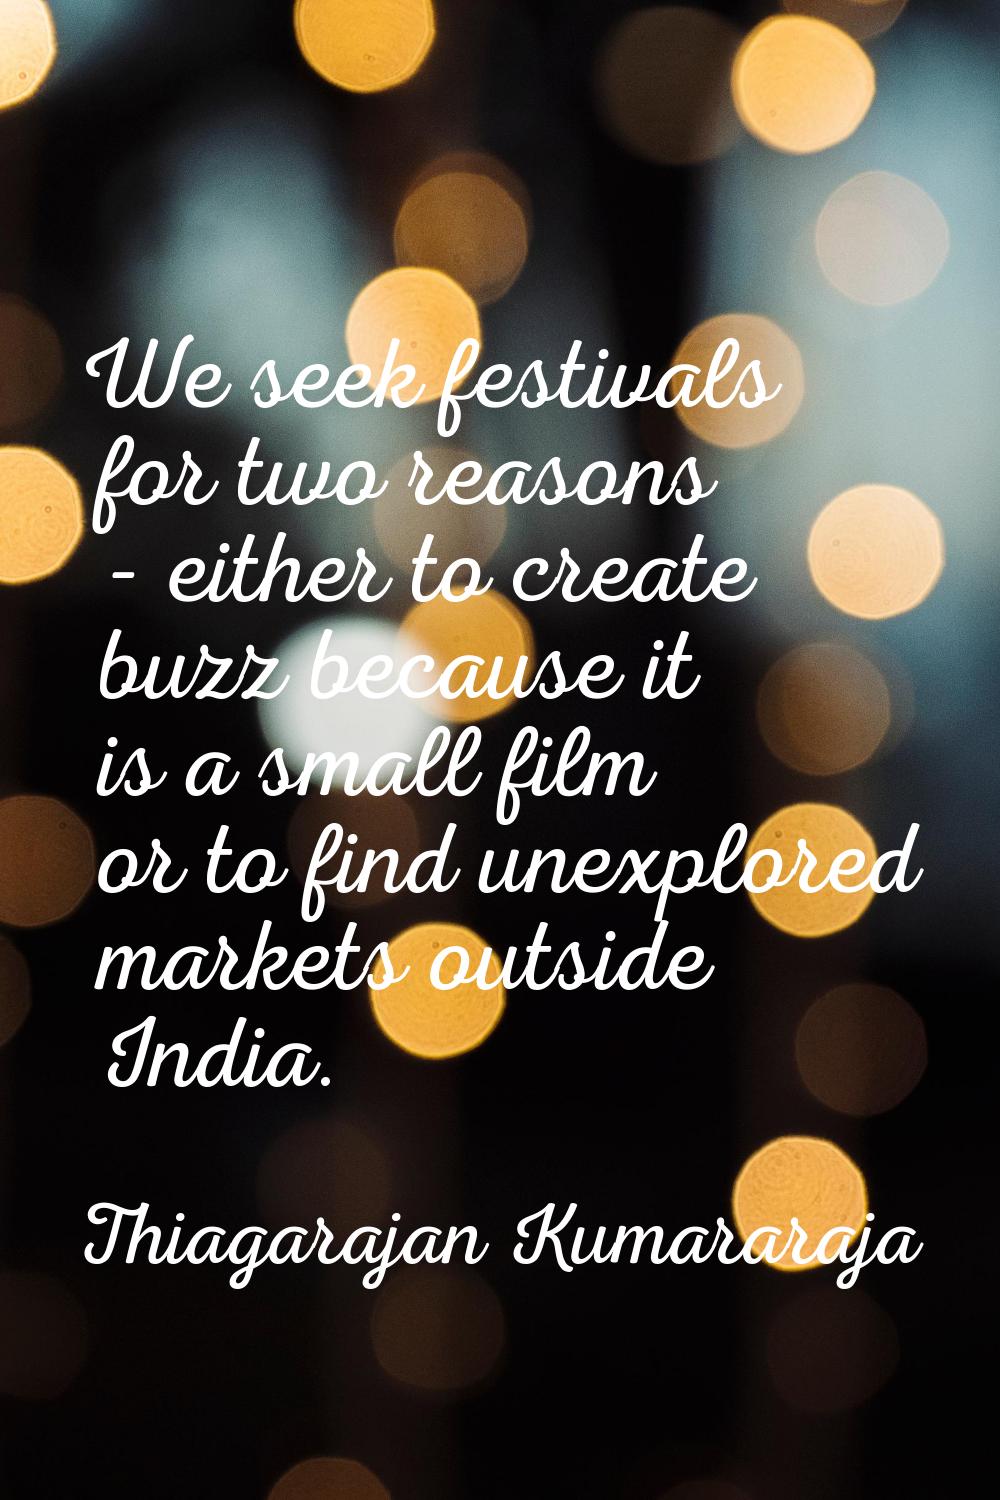 We seek festivals for two reasons - either to create buzz because it is a small film or to find une